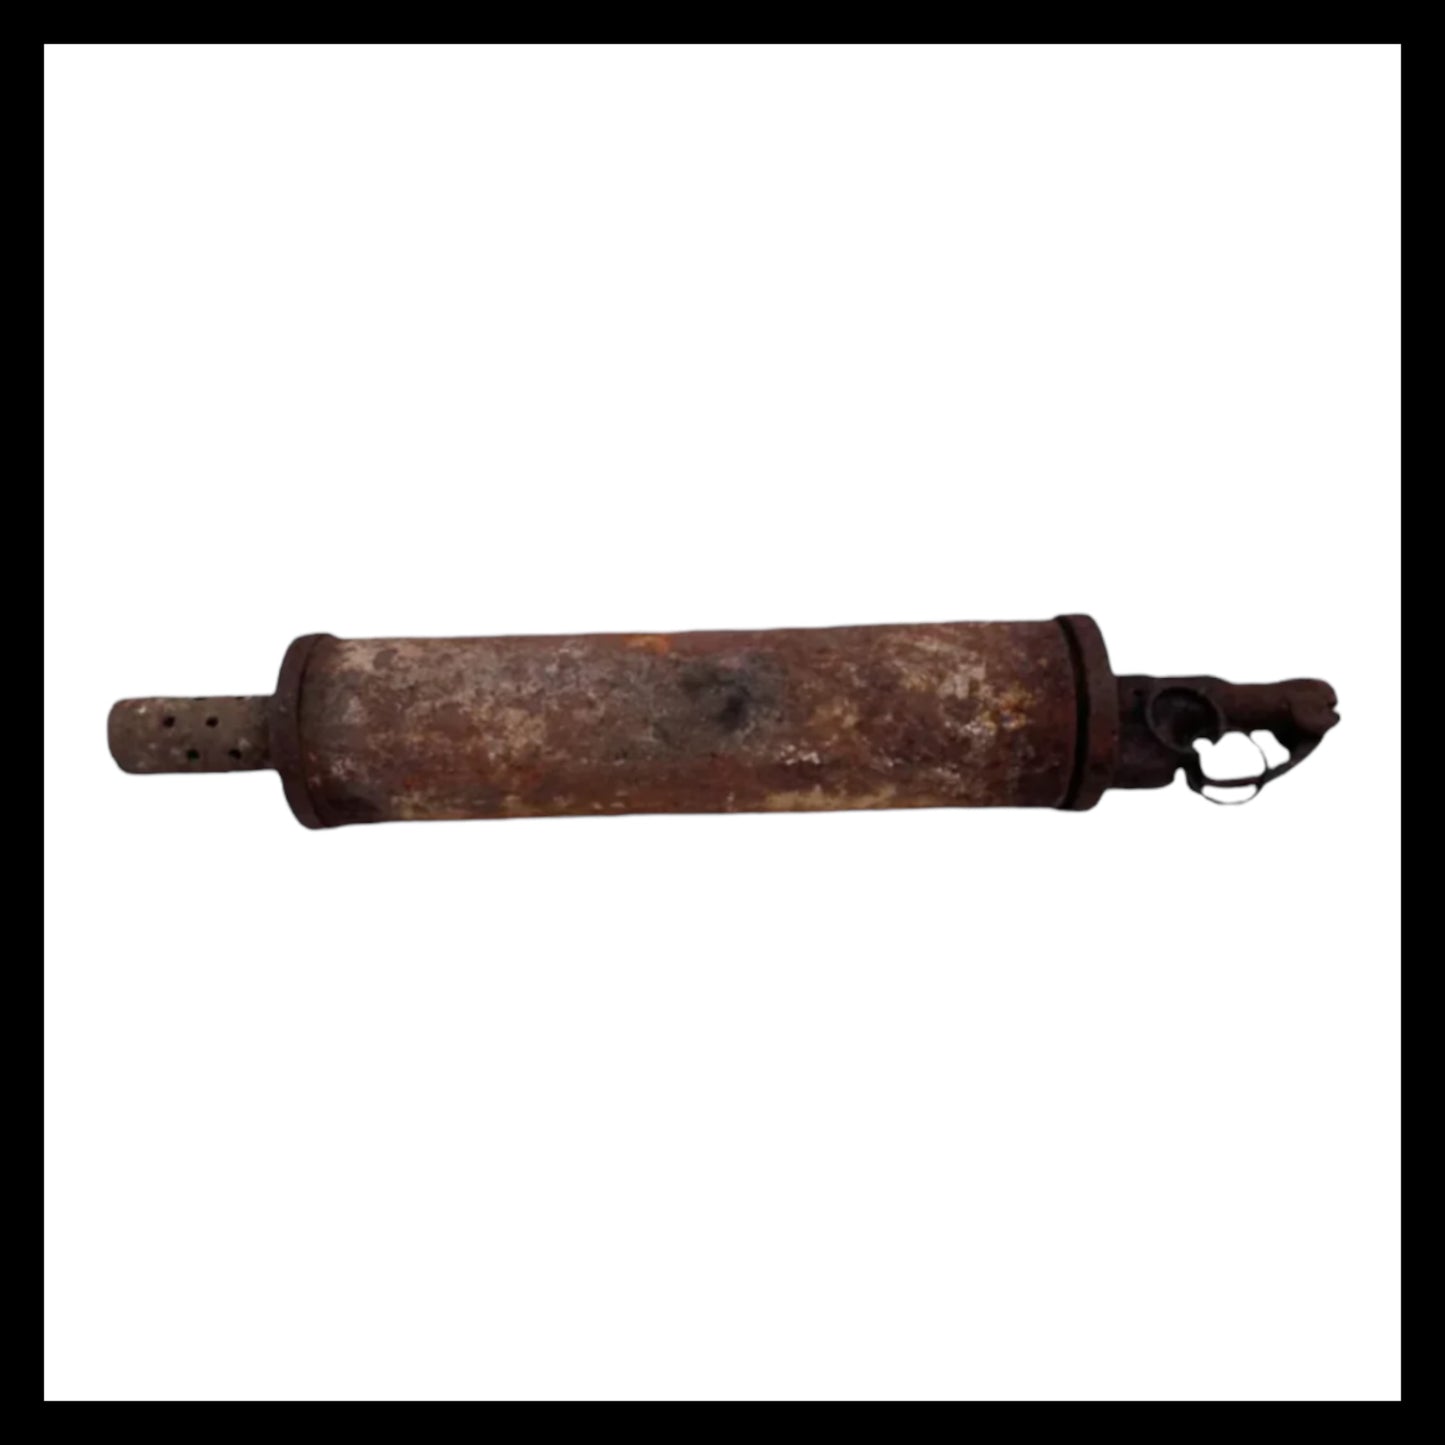 WW1 Complete Inert Stokes Mortar Round, WW1 Collectable